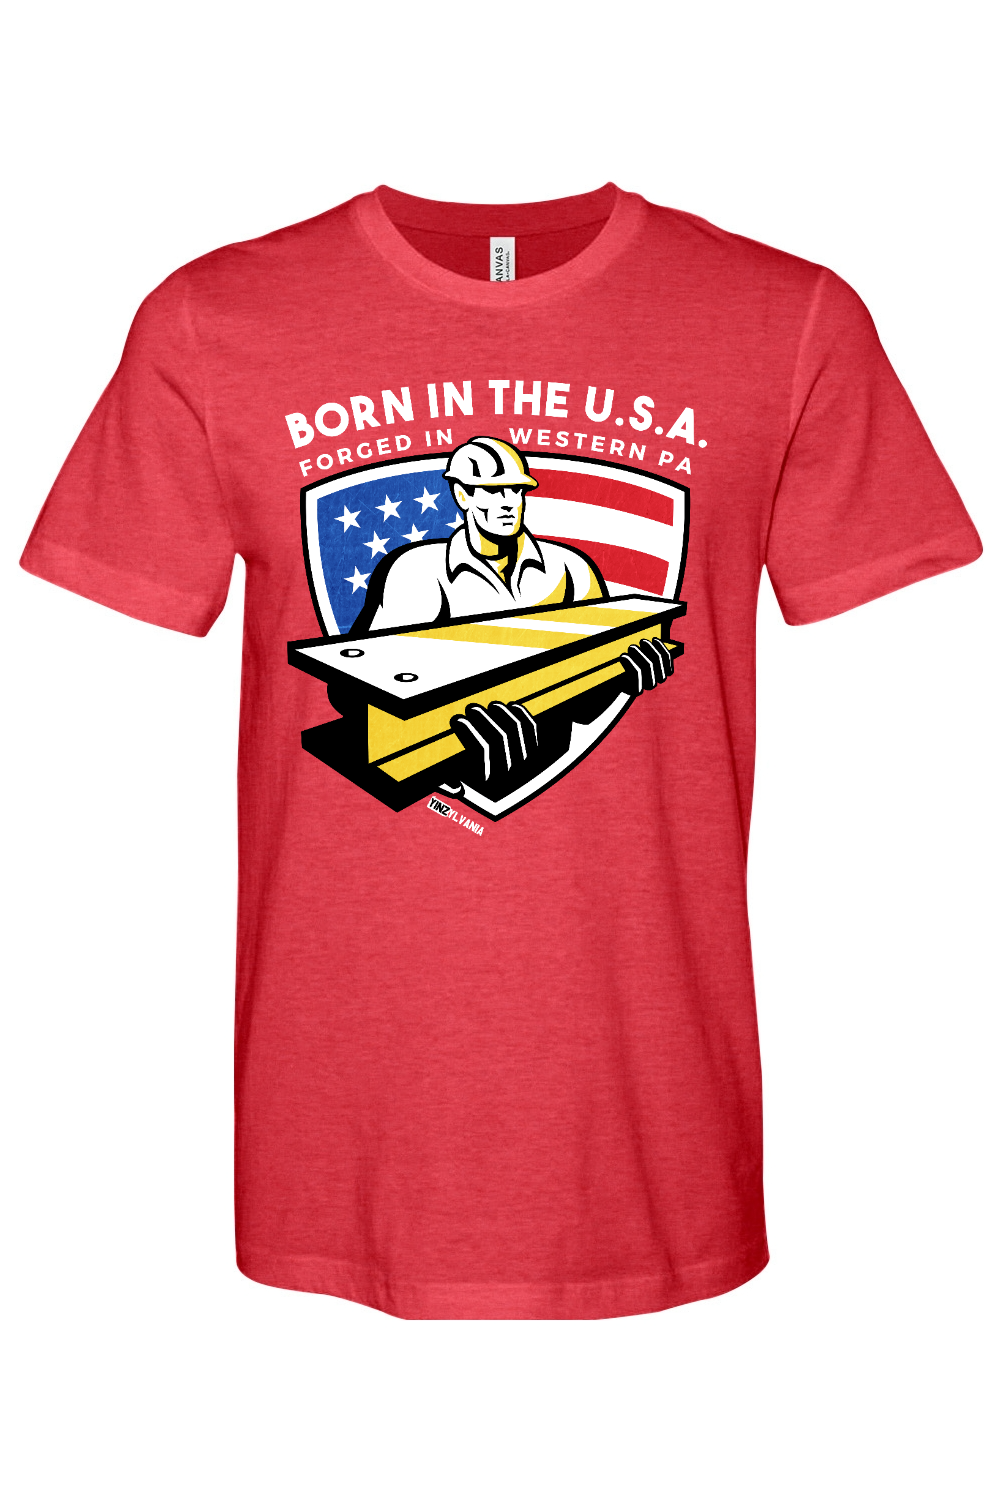 Born in the USA - Forged in Western PA - Bella + Canvas Heathered Jersey Tee - Yinzylvania